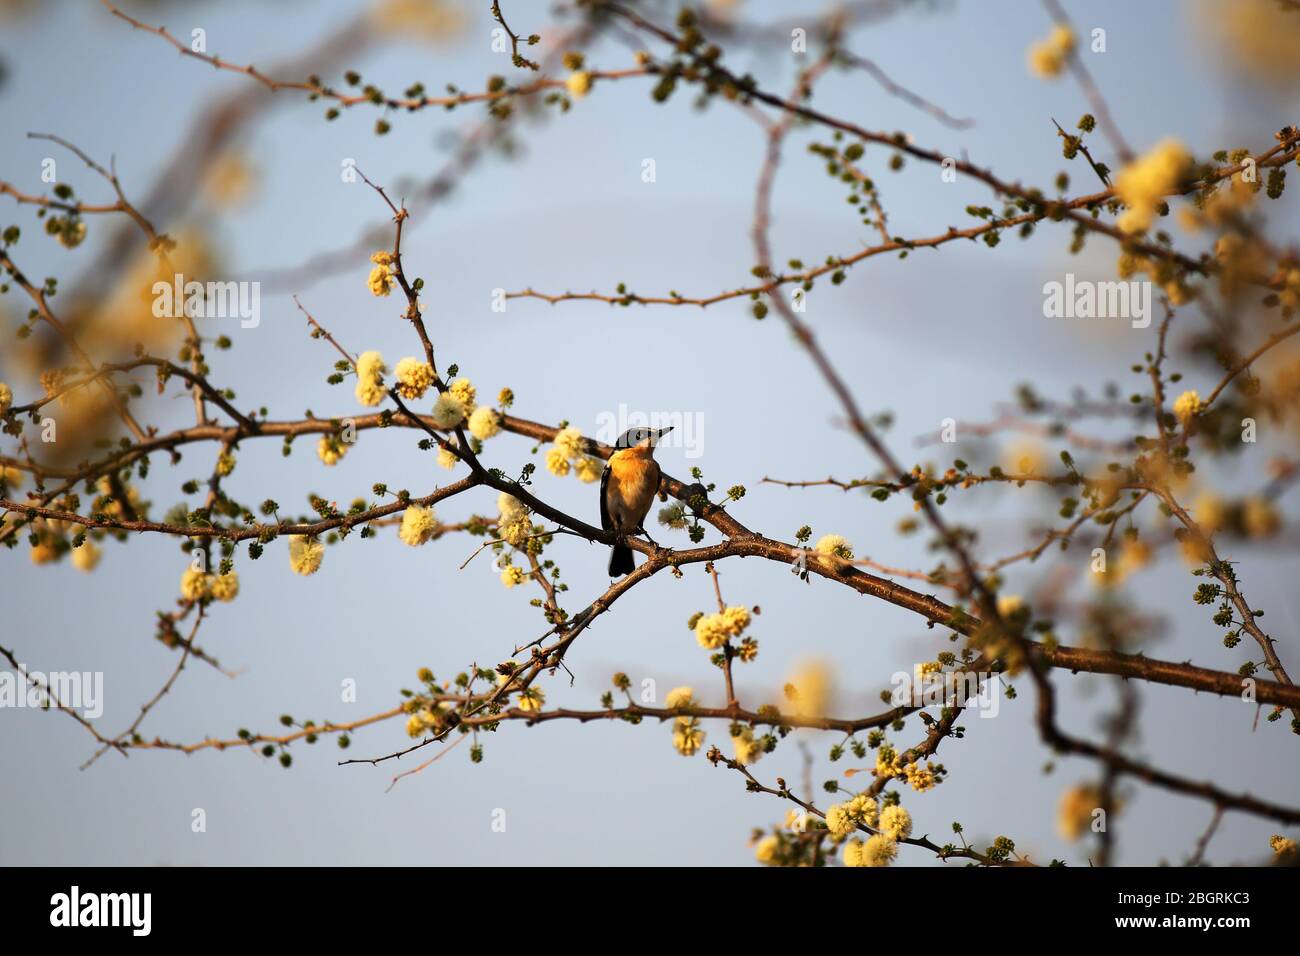 A yellow and black bird on a branch of a tree with yellow flowers in Epupa Falls, Namibia. Stock Photo